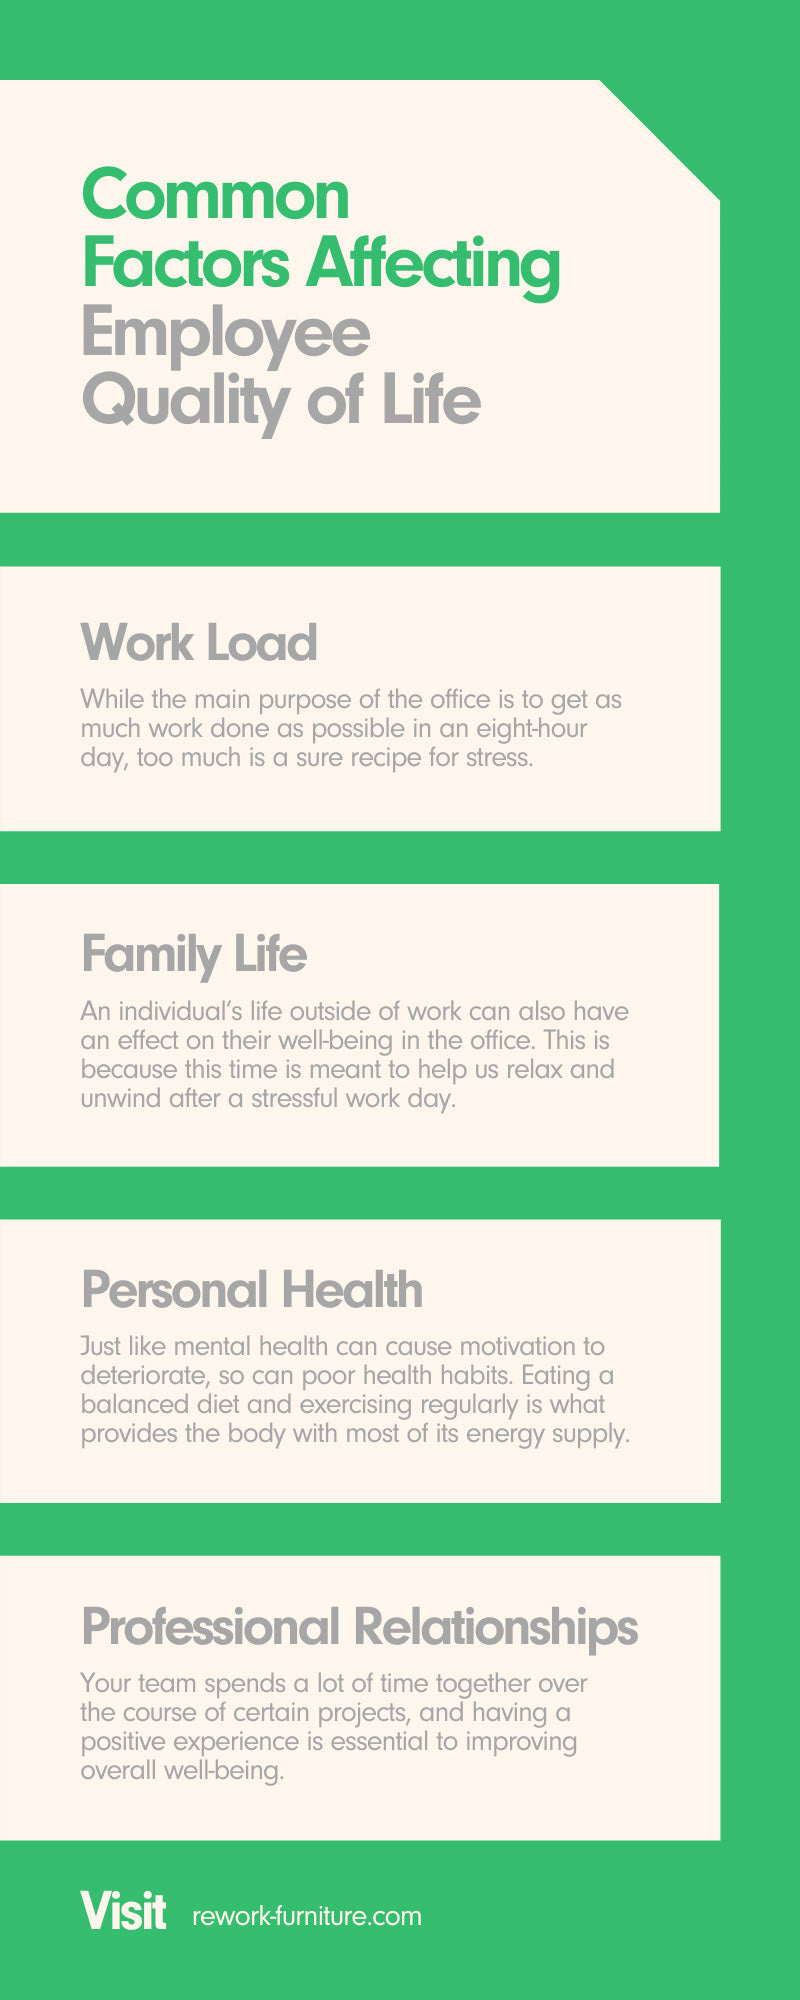 Common Factors Affecting Employee Quality of Life